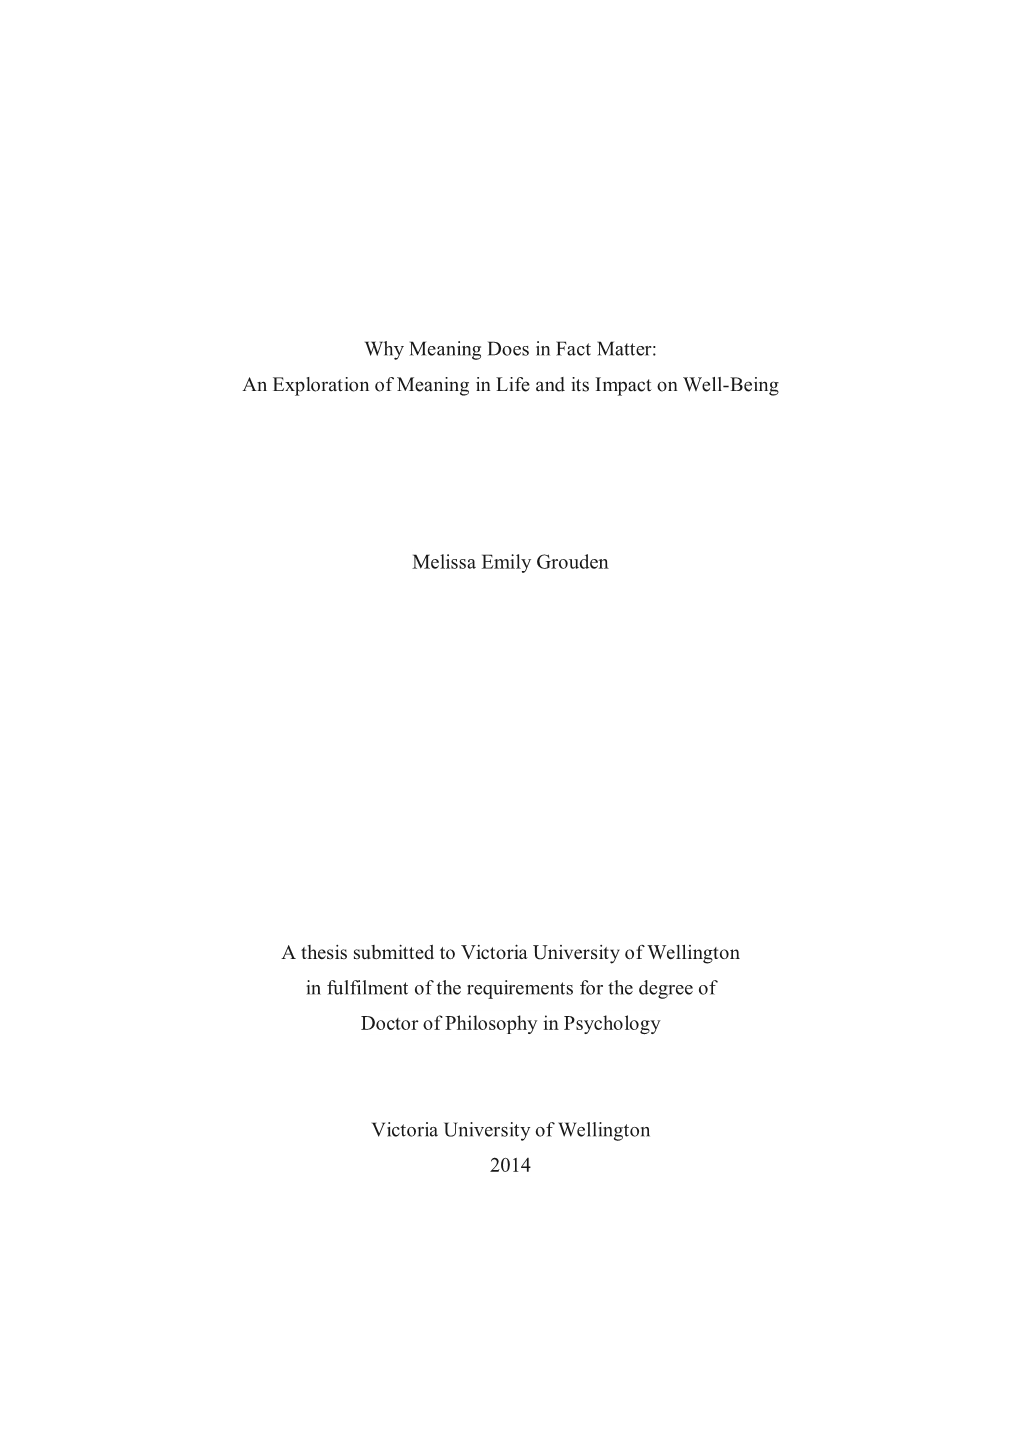 Why Meaning Does in Fact Matter: an Exploration of Meaning in Life and Its Impact on Well-Being Melissa Emily Grouden a Thesis S